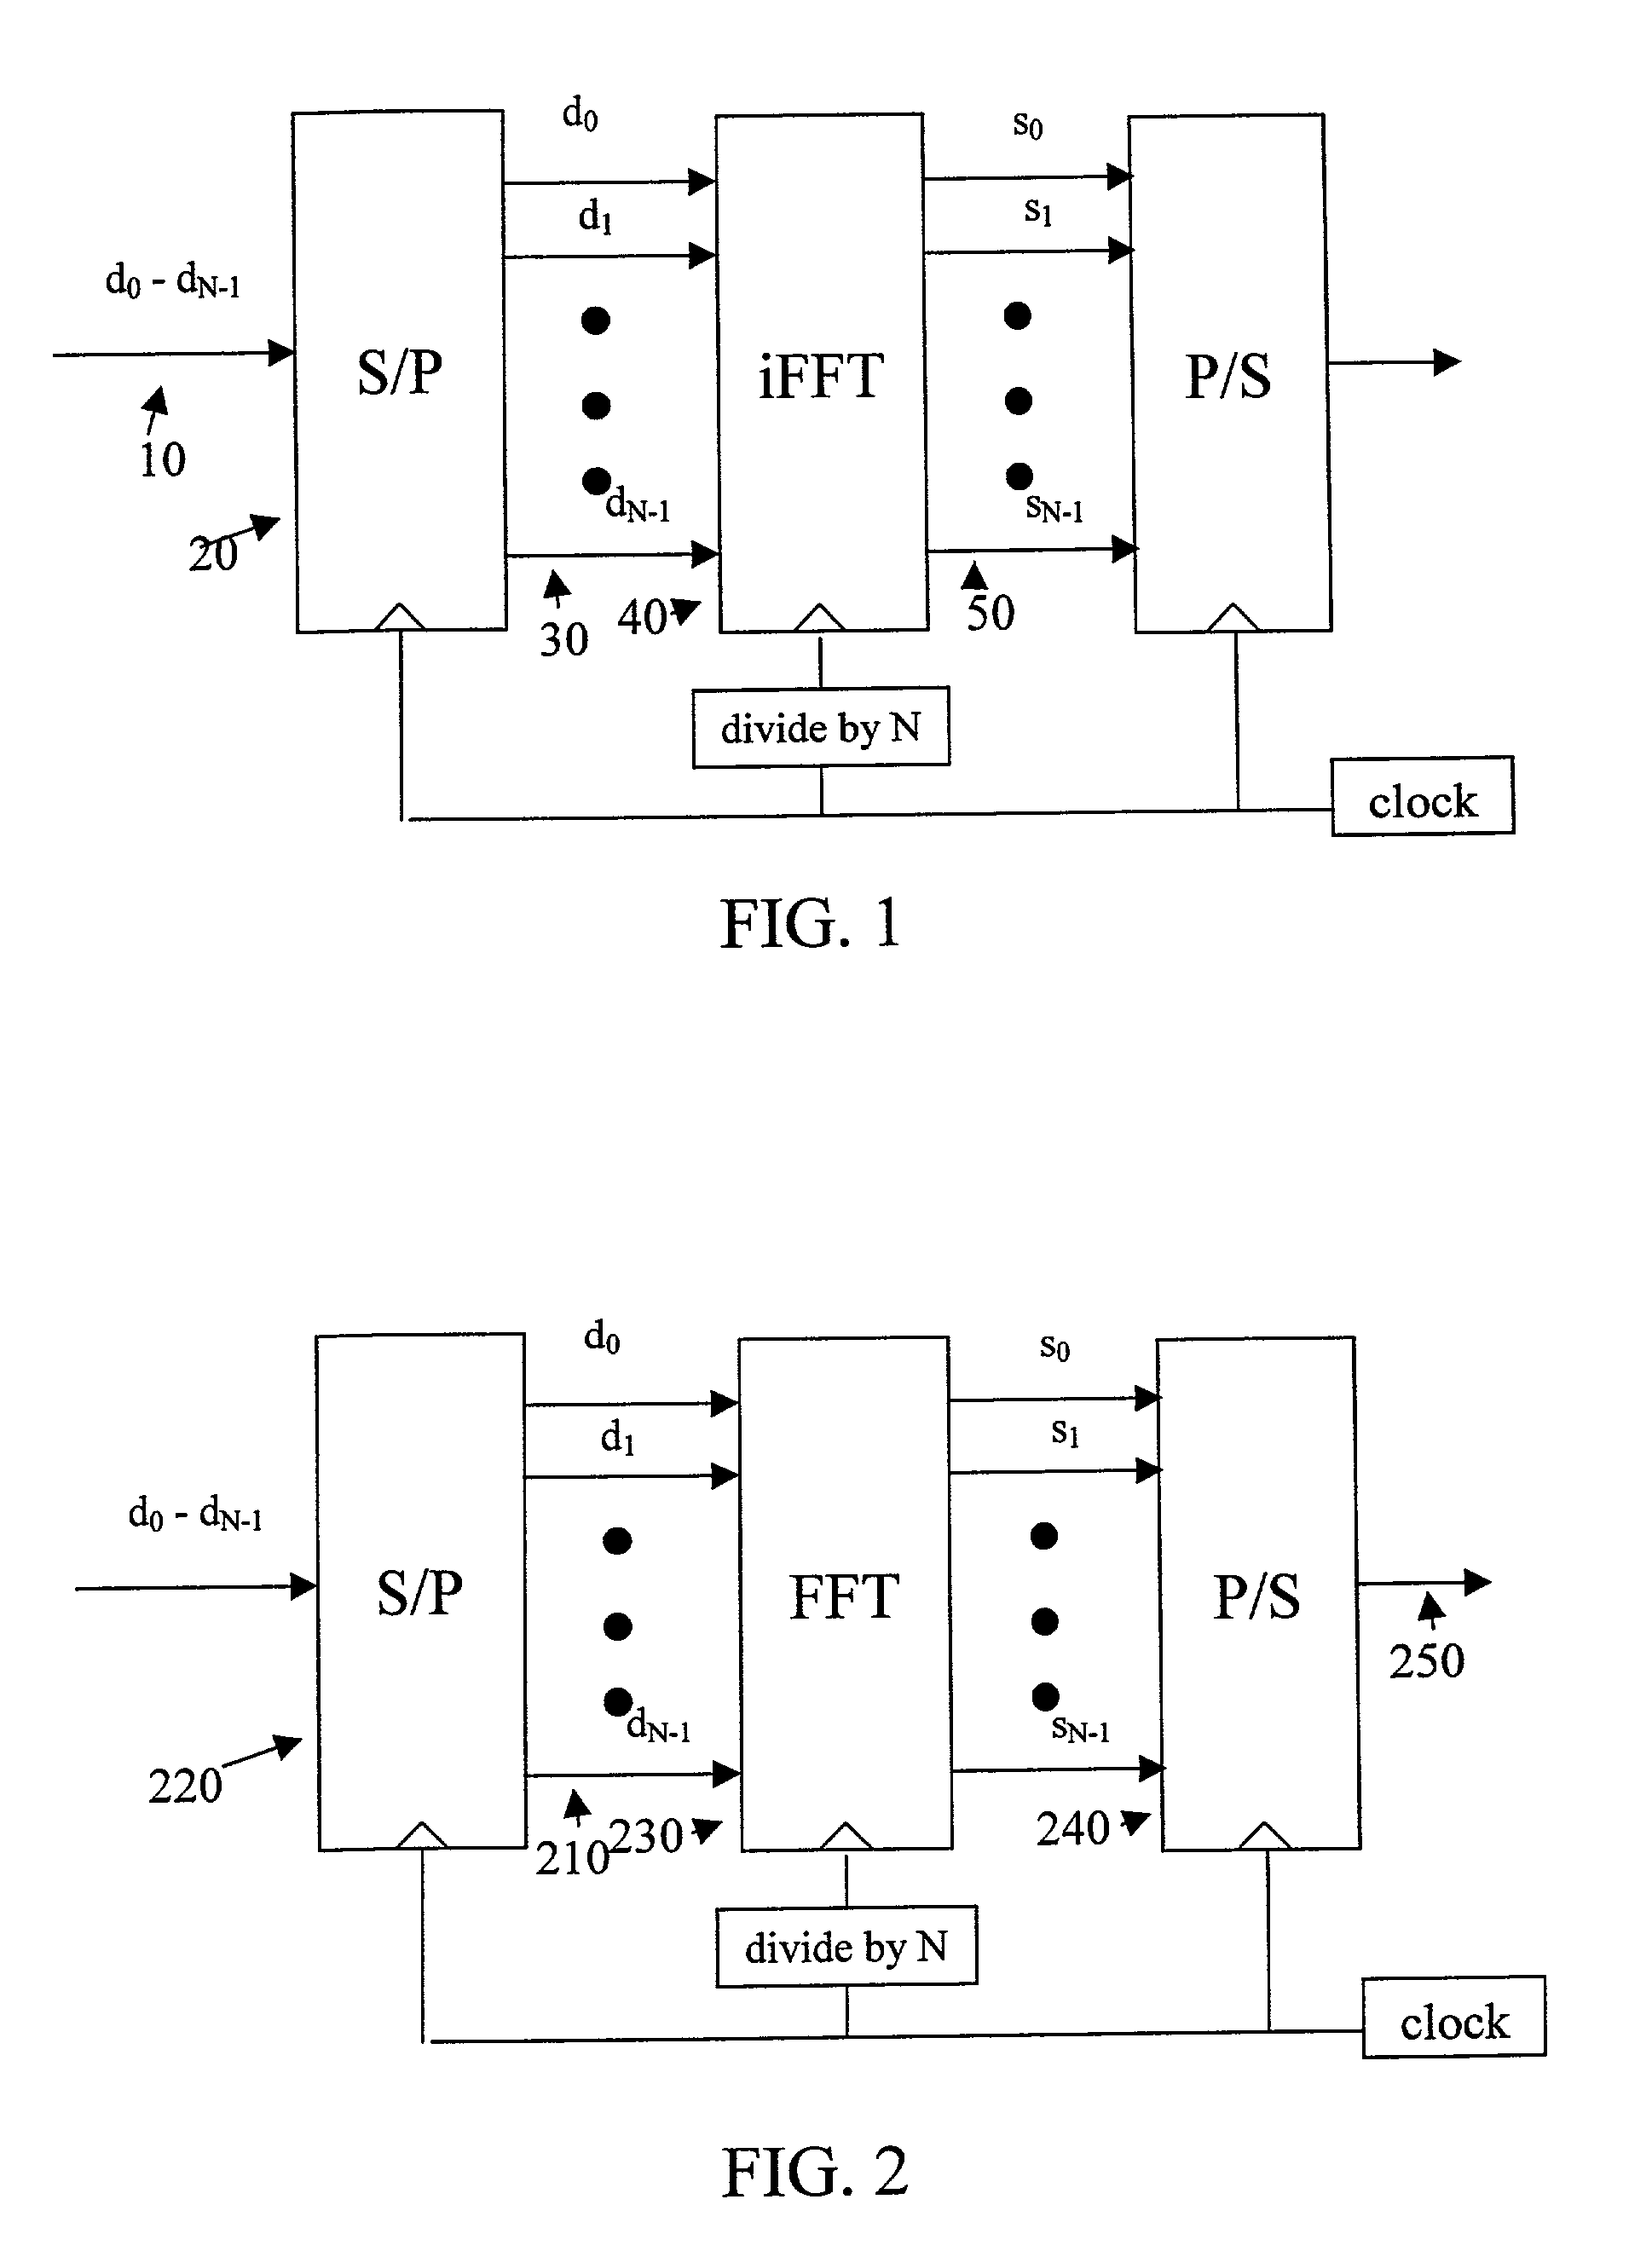 Multi-carrier communication systems employing variable symbol rates and number of carriers